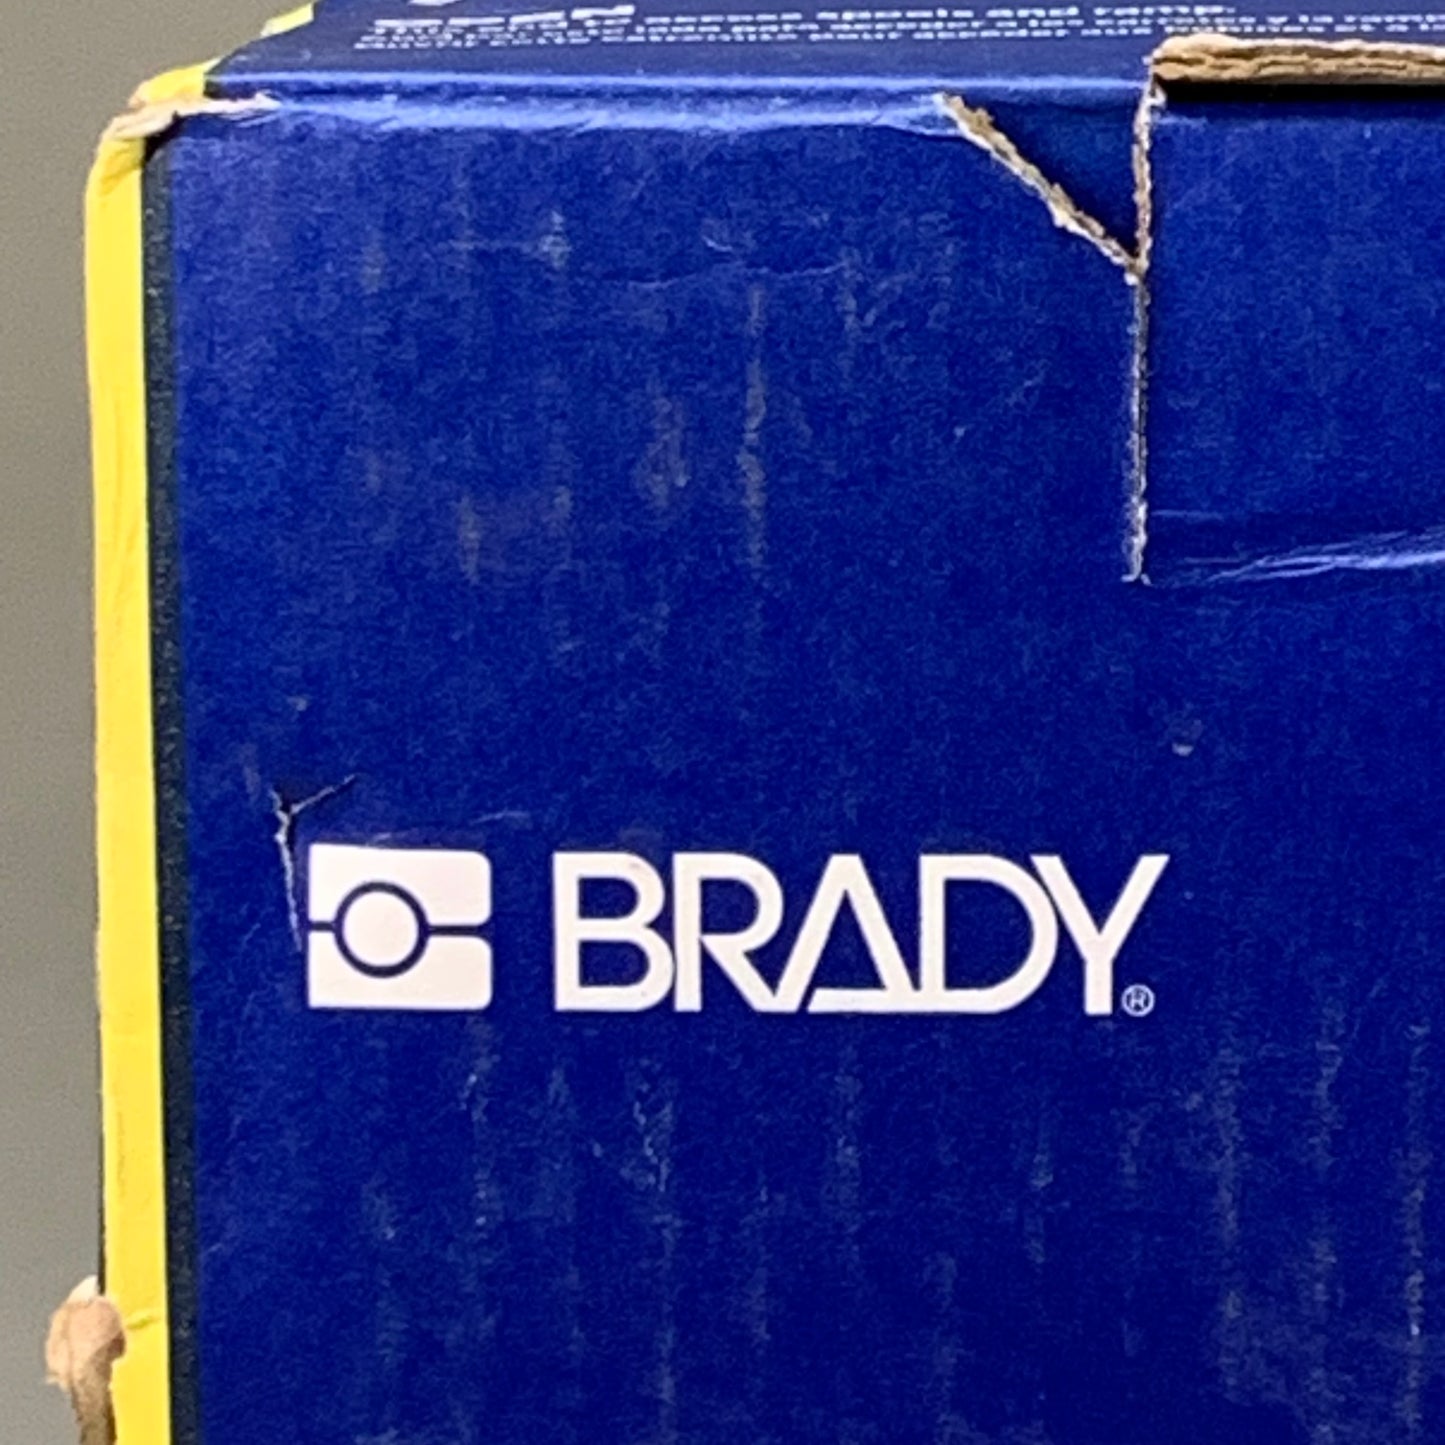 BRADY Portable Handheld Label Printer BMP61 W/ 2 Boxes of Heat Shrink Labels (Pre-Owned)